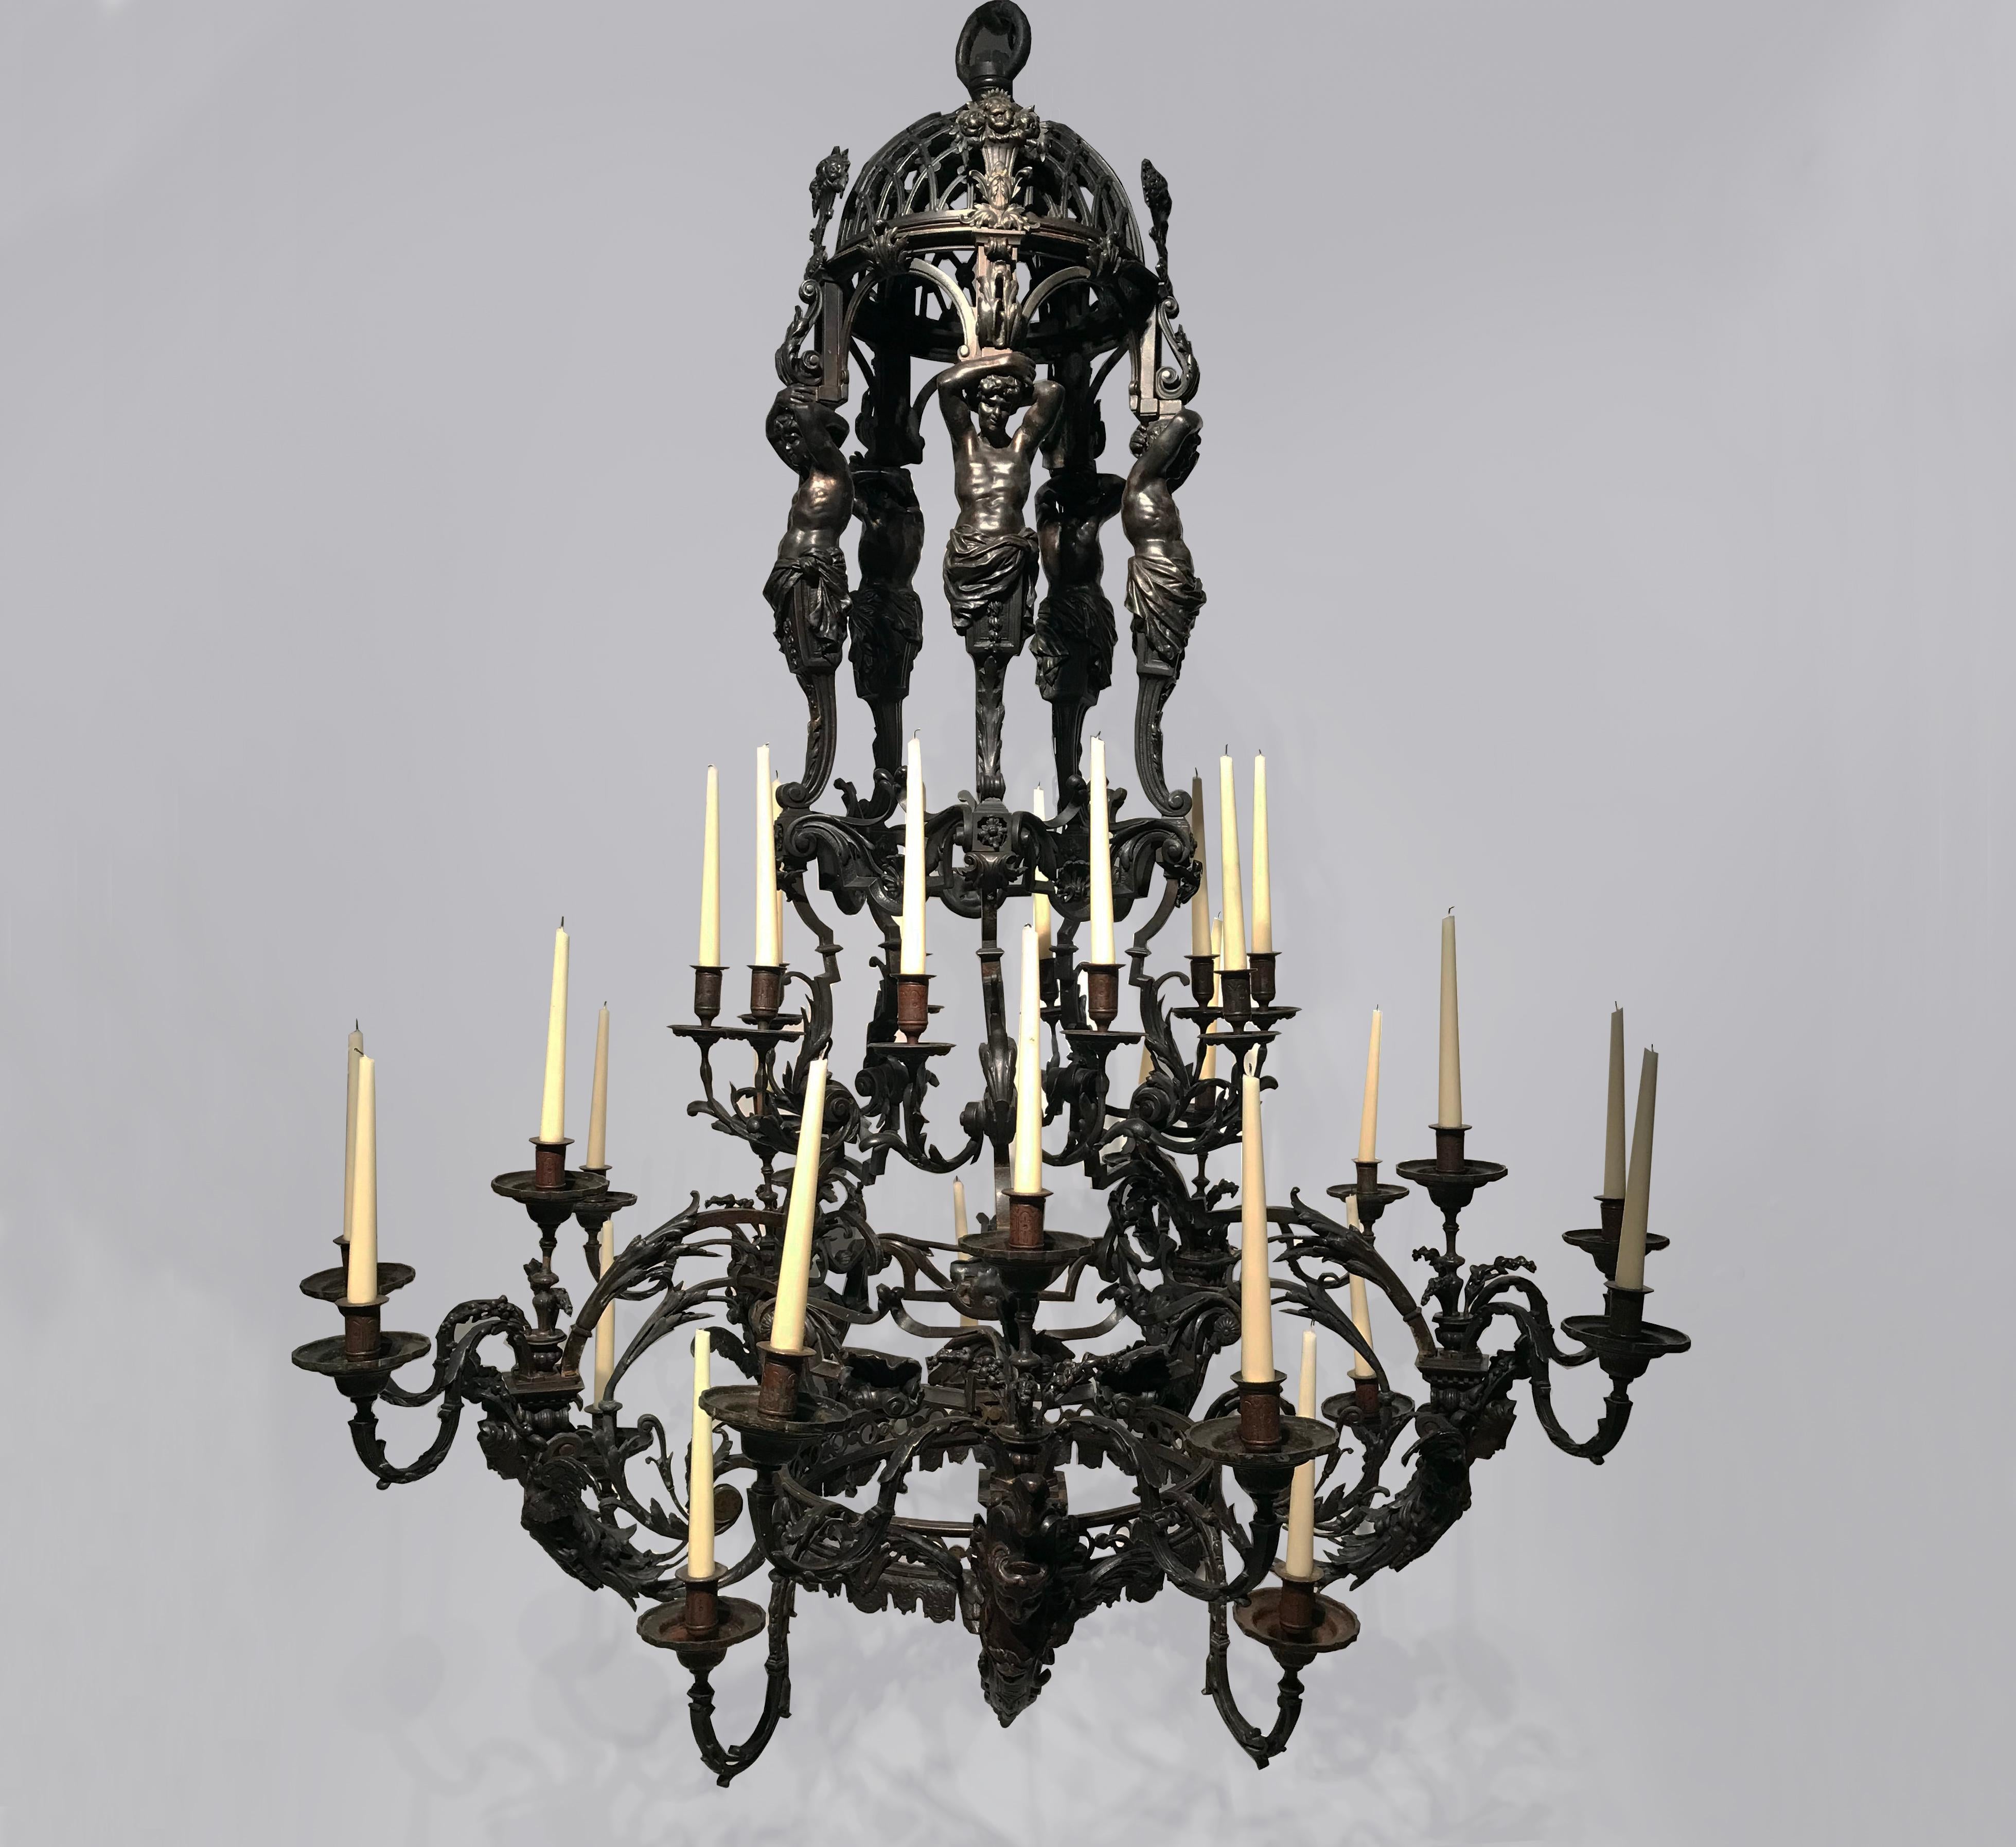 19th French bronze chandelier of palatial proportions and exquisite quality. 

This magnificent 30-light chandelier has a pierced domed corona supported by five beautifully cast solid bronze male caryatid supports, above scrolled acanthus tiers each